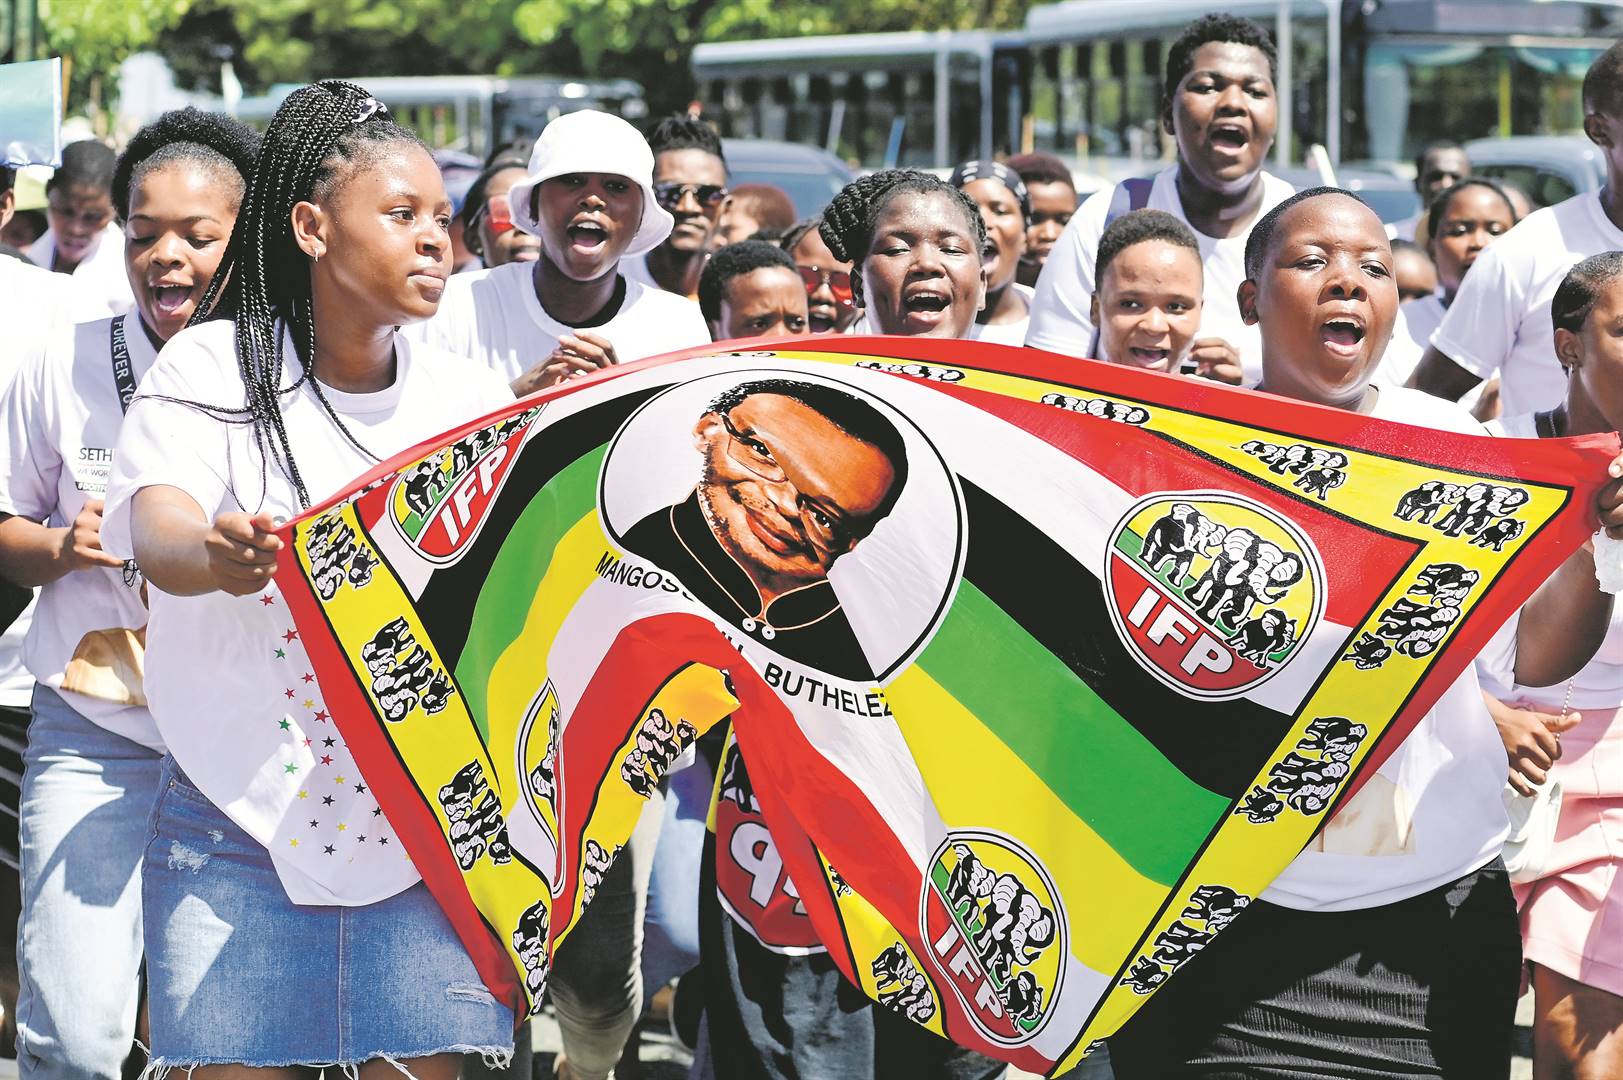 Undoubtedly, the IFP appears to be a party associated with a dead man: it continues to grapple with overcoming the late Mangosuthu Buthelezi’s dominant genome ingrained in its DNA.